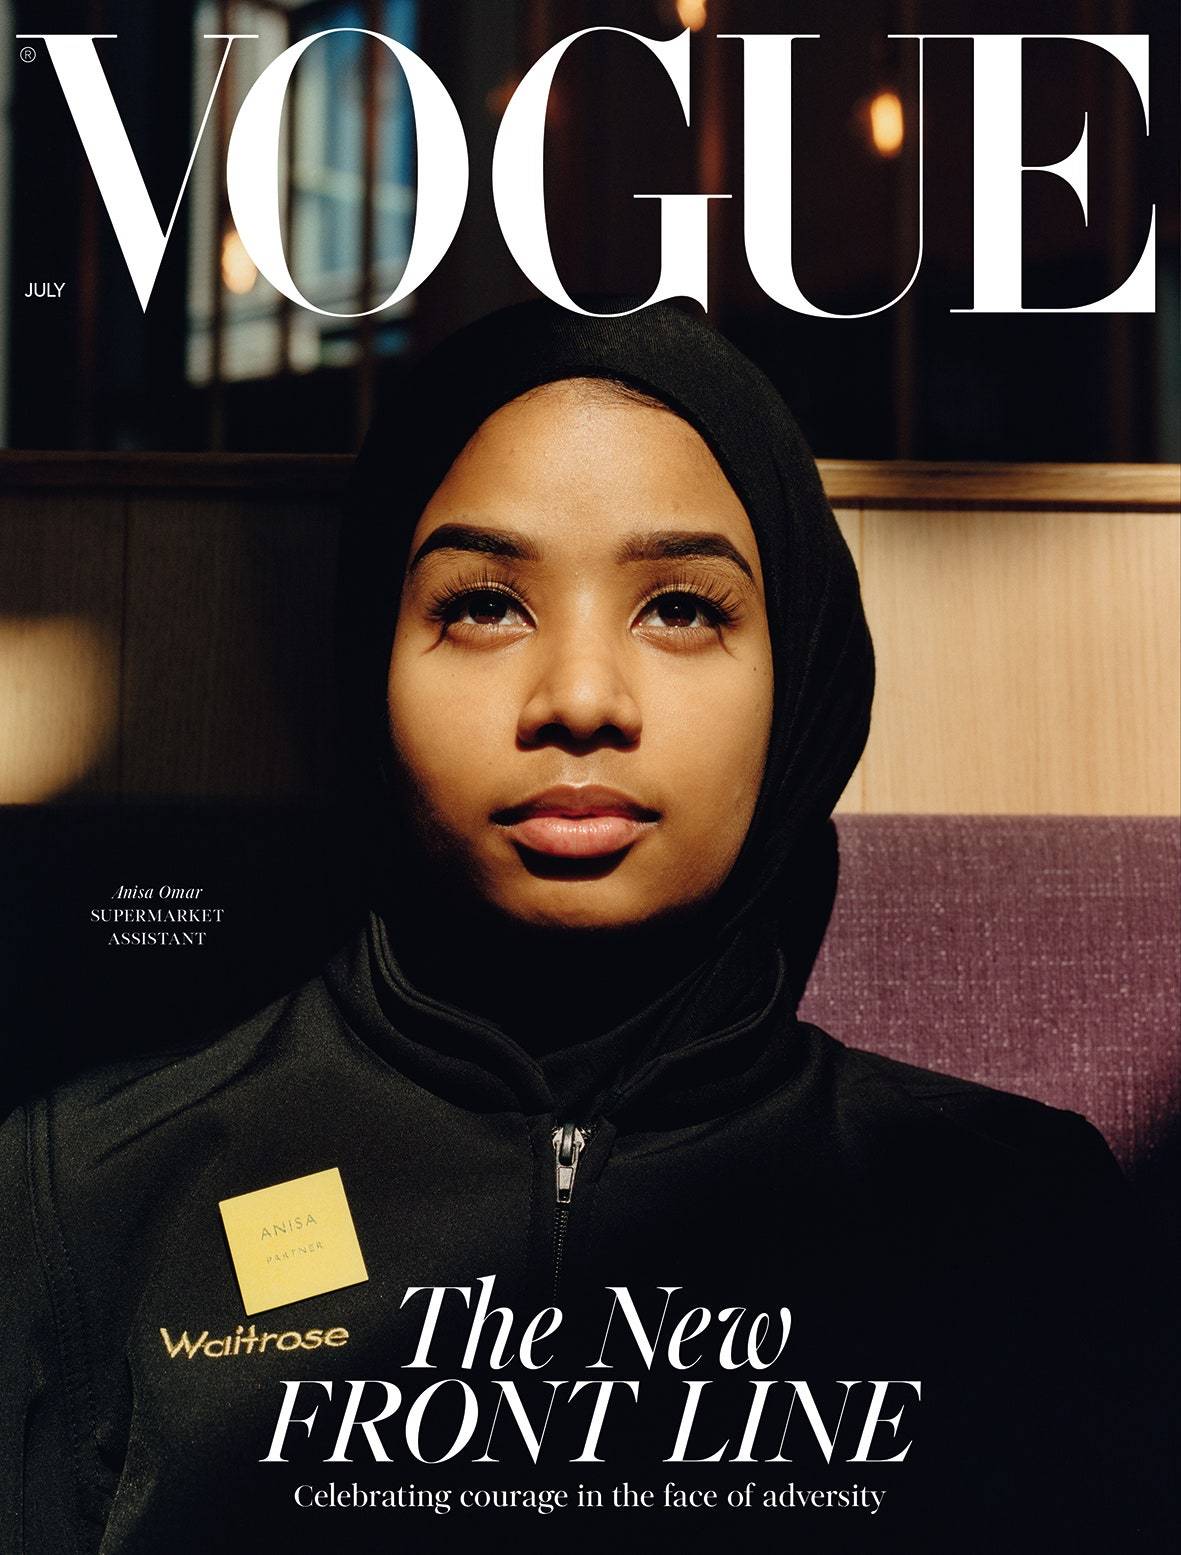 vogue-july-2020-cover-frontline-workers